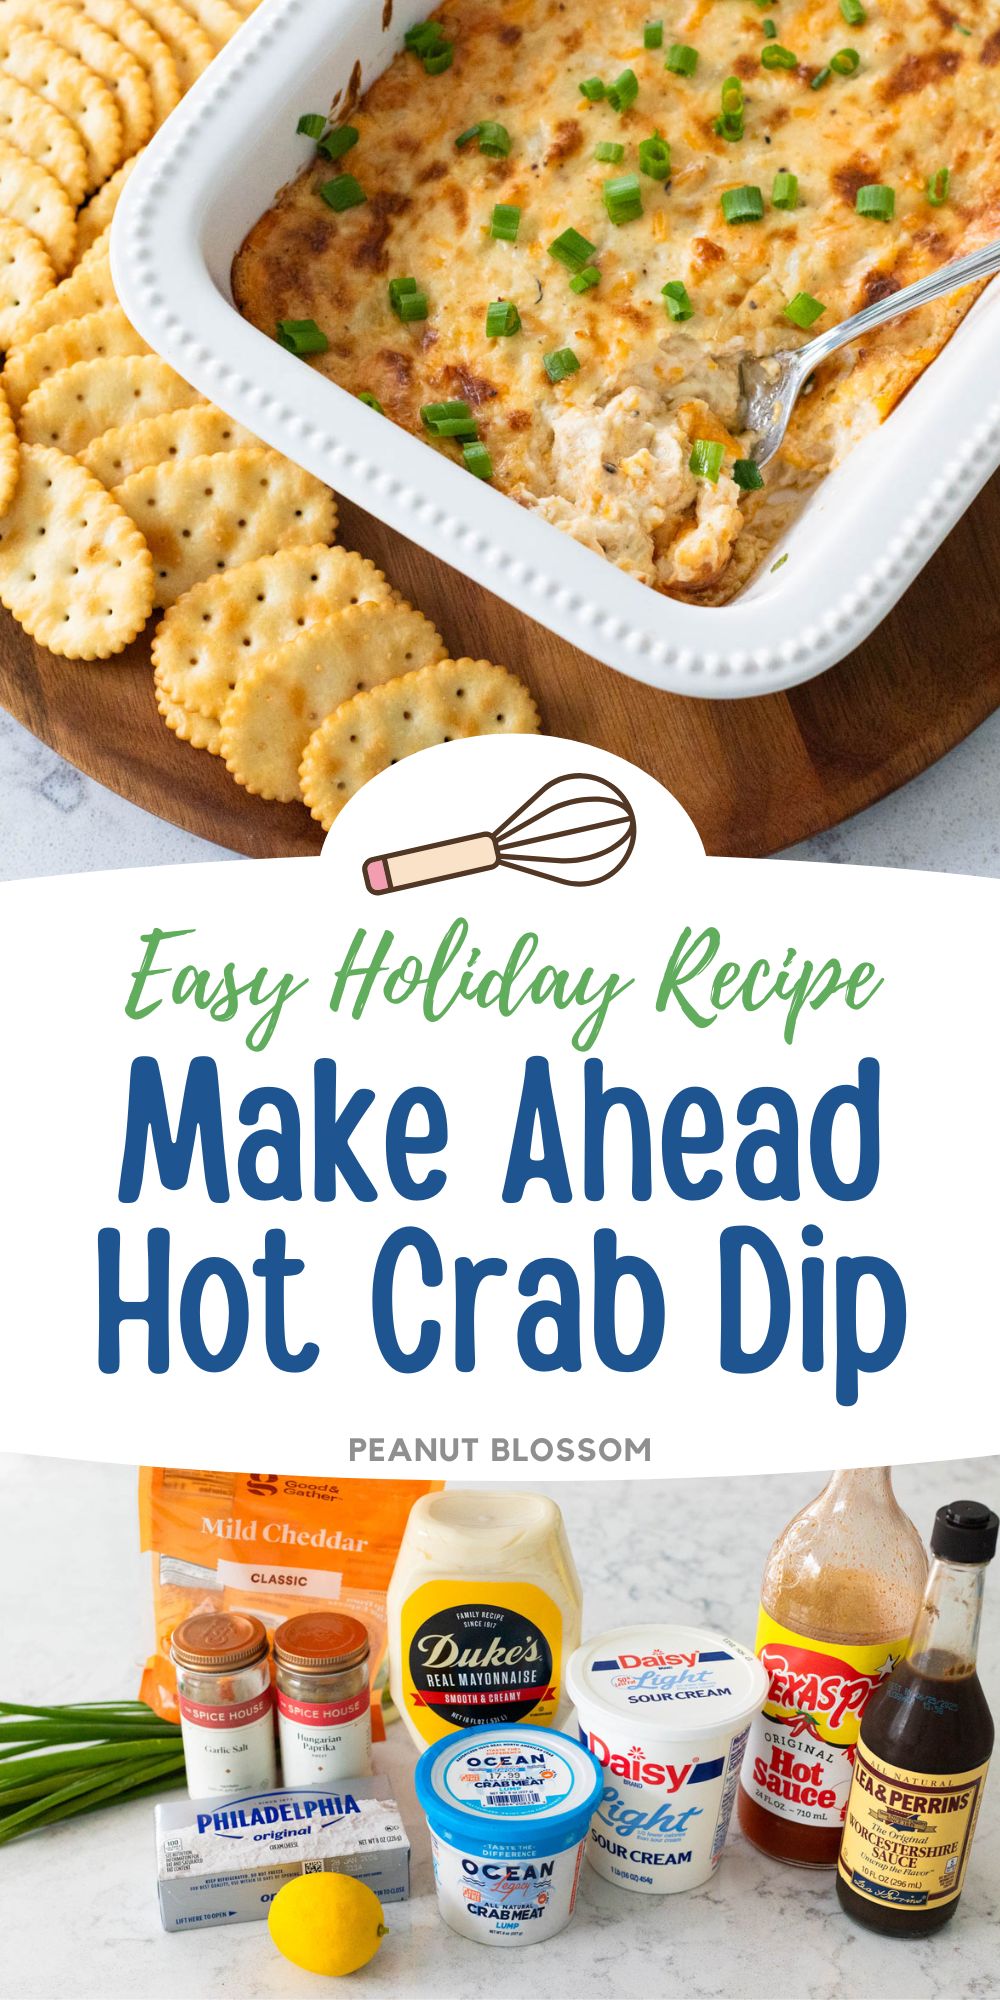 The photo collage shows the hot crab dip served with crackers next to a photo of the ingredients needed to make it.